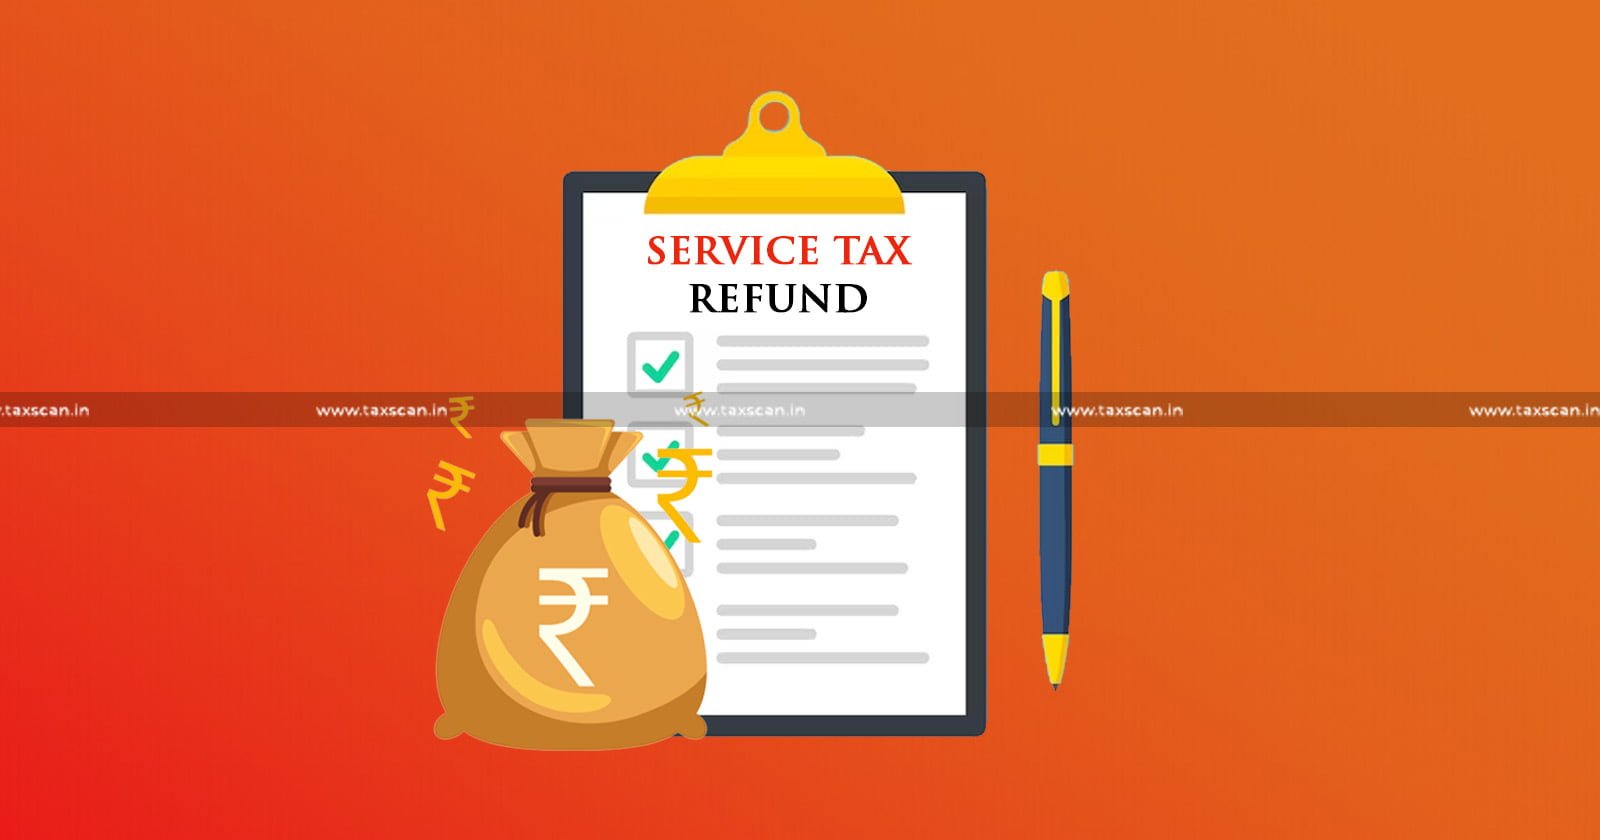 No Bar of Unjust Enrichment Applicable When Payment made by Appellant - CESTAT allows Refund of Service Tax - TAXSCAN